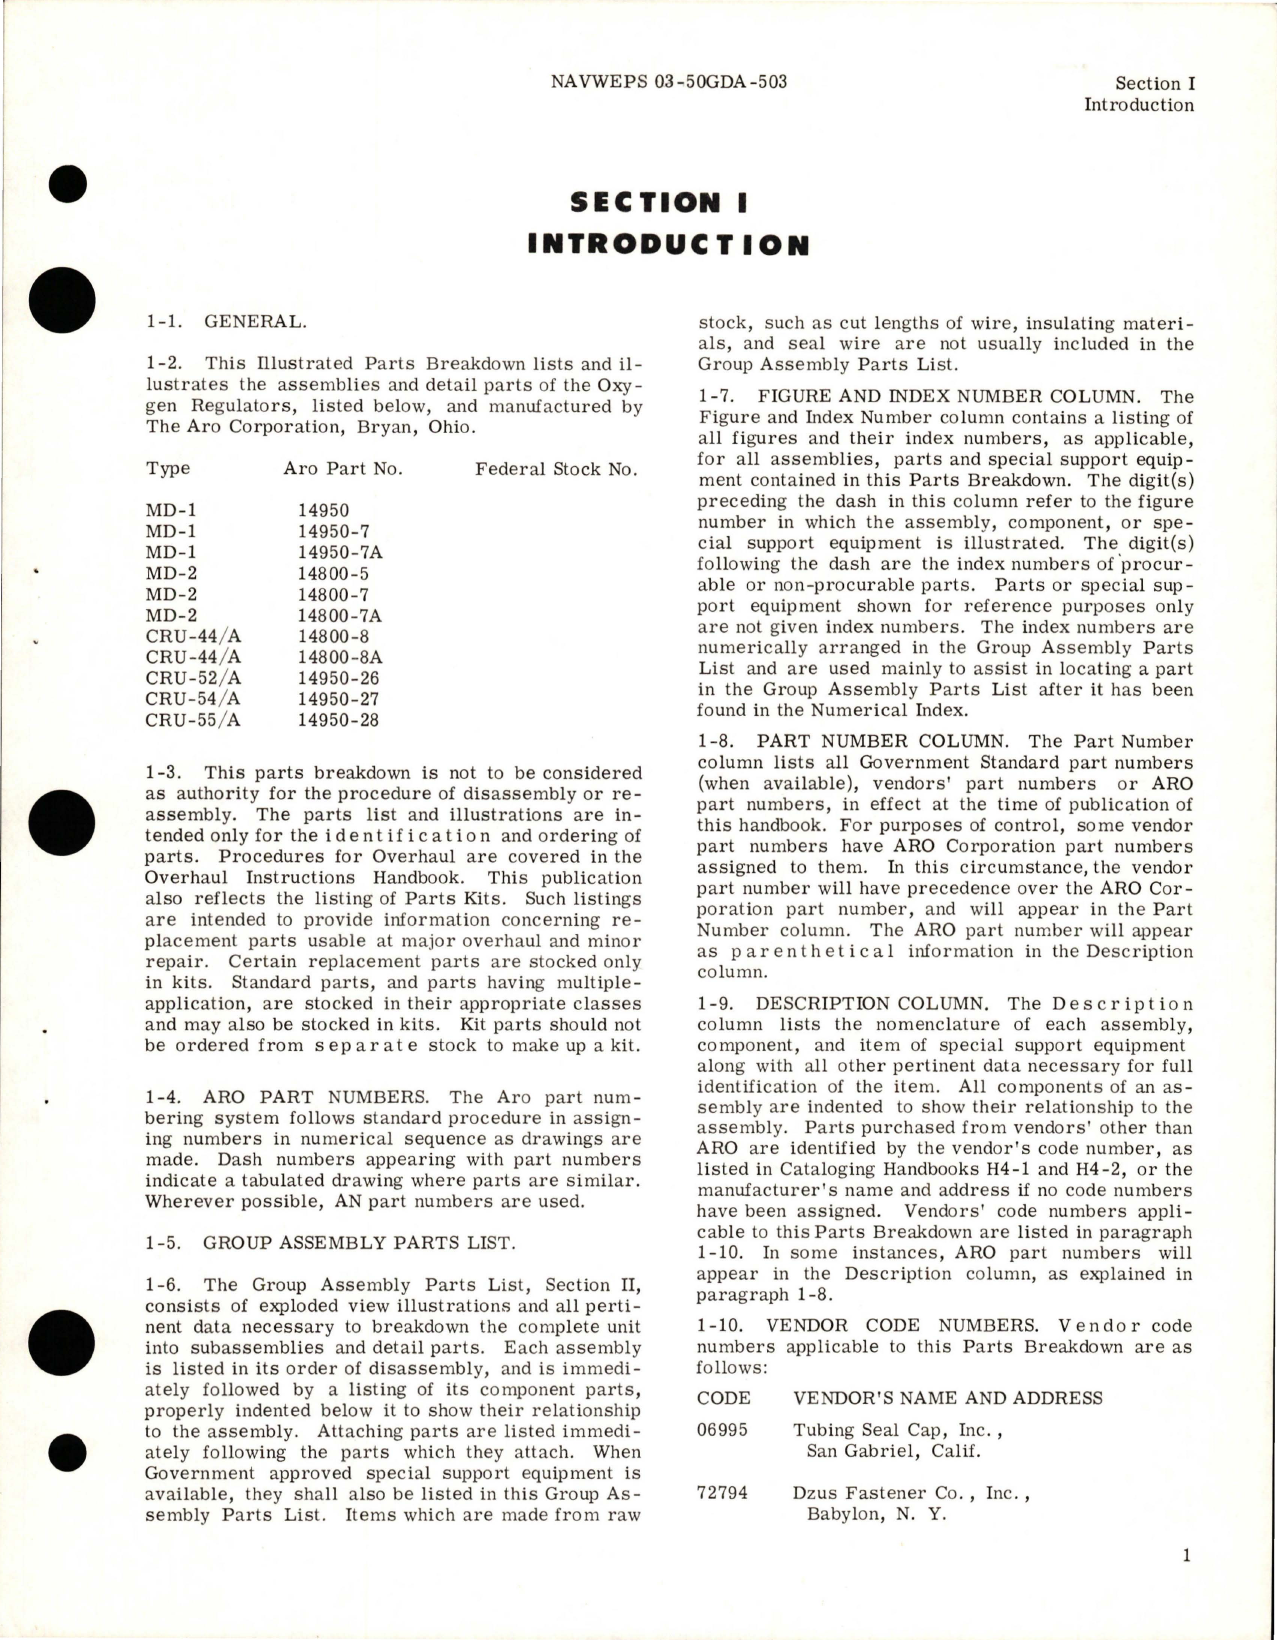 Sample page 5 from AirCorps Library document: Illustrated Parts Breakdown for Oxygen Regulator 